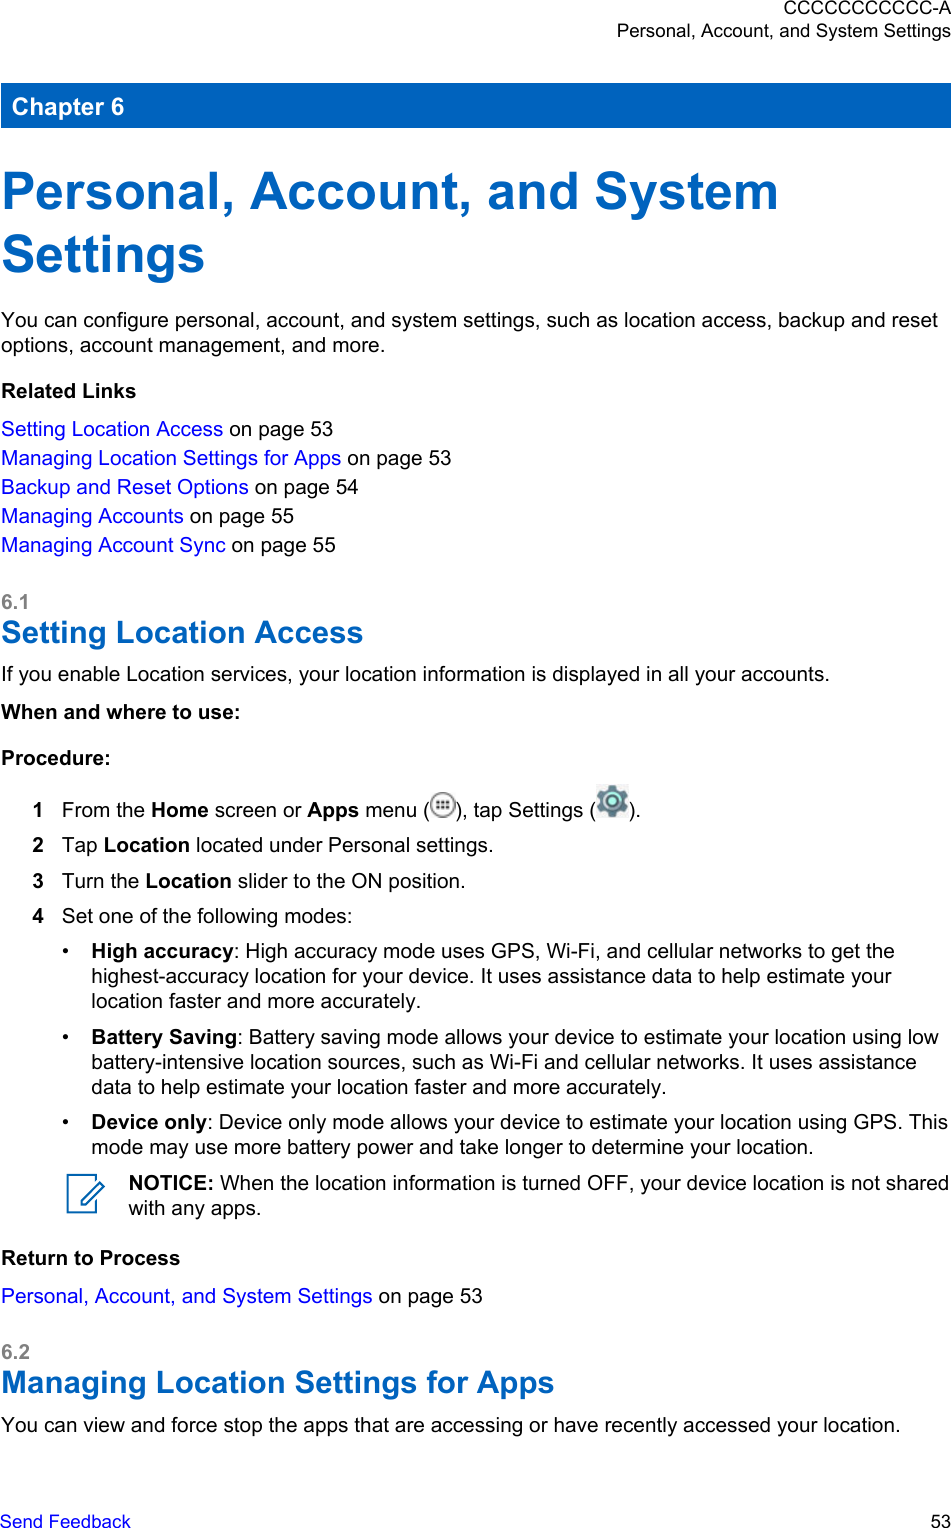 Chapter 6Personal, Account, and SystemSettingsYou can configure personal, account, and system settings, such as location access, backup and resetoptions, account management, and more.Related LinksSetting Location Access on page 53Managing Location Settings for Apps on page 53Backup and Reset Options on page 54Managing Accounts on page 55Managing Account Sync on page 556.1Setting Location AccessIf you enable Location services, your location information is displayed in all your accounts.When and where to use:Procedure:1From the Home screen or Apps menu ( ), tap Settings ( ).2Tap Location located under Personal settings.3Turn the Location slider to the ON position.4Set one of the following modes:•High accuracy: High accuracy mode uses GPS, Wi-Fi, and cellular networks to get thehighest-accuracy location for your device. It uses assistance data to help estimate yourlocation faster and more accurately.•Battery Saving: Battery saving mode allows your device to estimate your location using lowbattery-intensive location sources, such as Wi-Fi and cellular networks. It uses assistancedata to help estimate your location faster and more accurately.•Device only: Device only mode allows your device to estimate your location using GPS. Thismode may use more battery power and take longer to determine your location.NOTICE: When the location information is turned OFF, your device location is not sharedwith any apps.Return to ProcessPersonal, Account, and System Settings on page 536.2Managing Location Settings for AppsYou can view and force stop the apps that are accessing or have recently accessed your location.CCCCCCCCCCC-APersonal, Account, and System SettingsSend Feedback   53